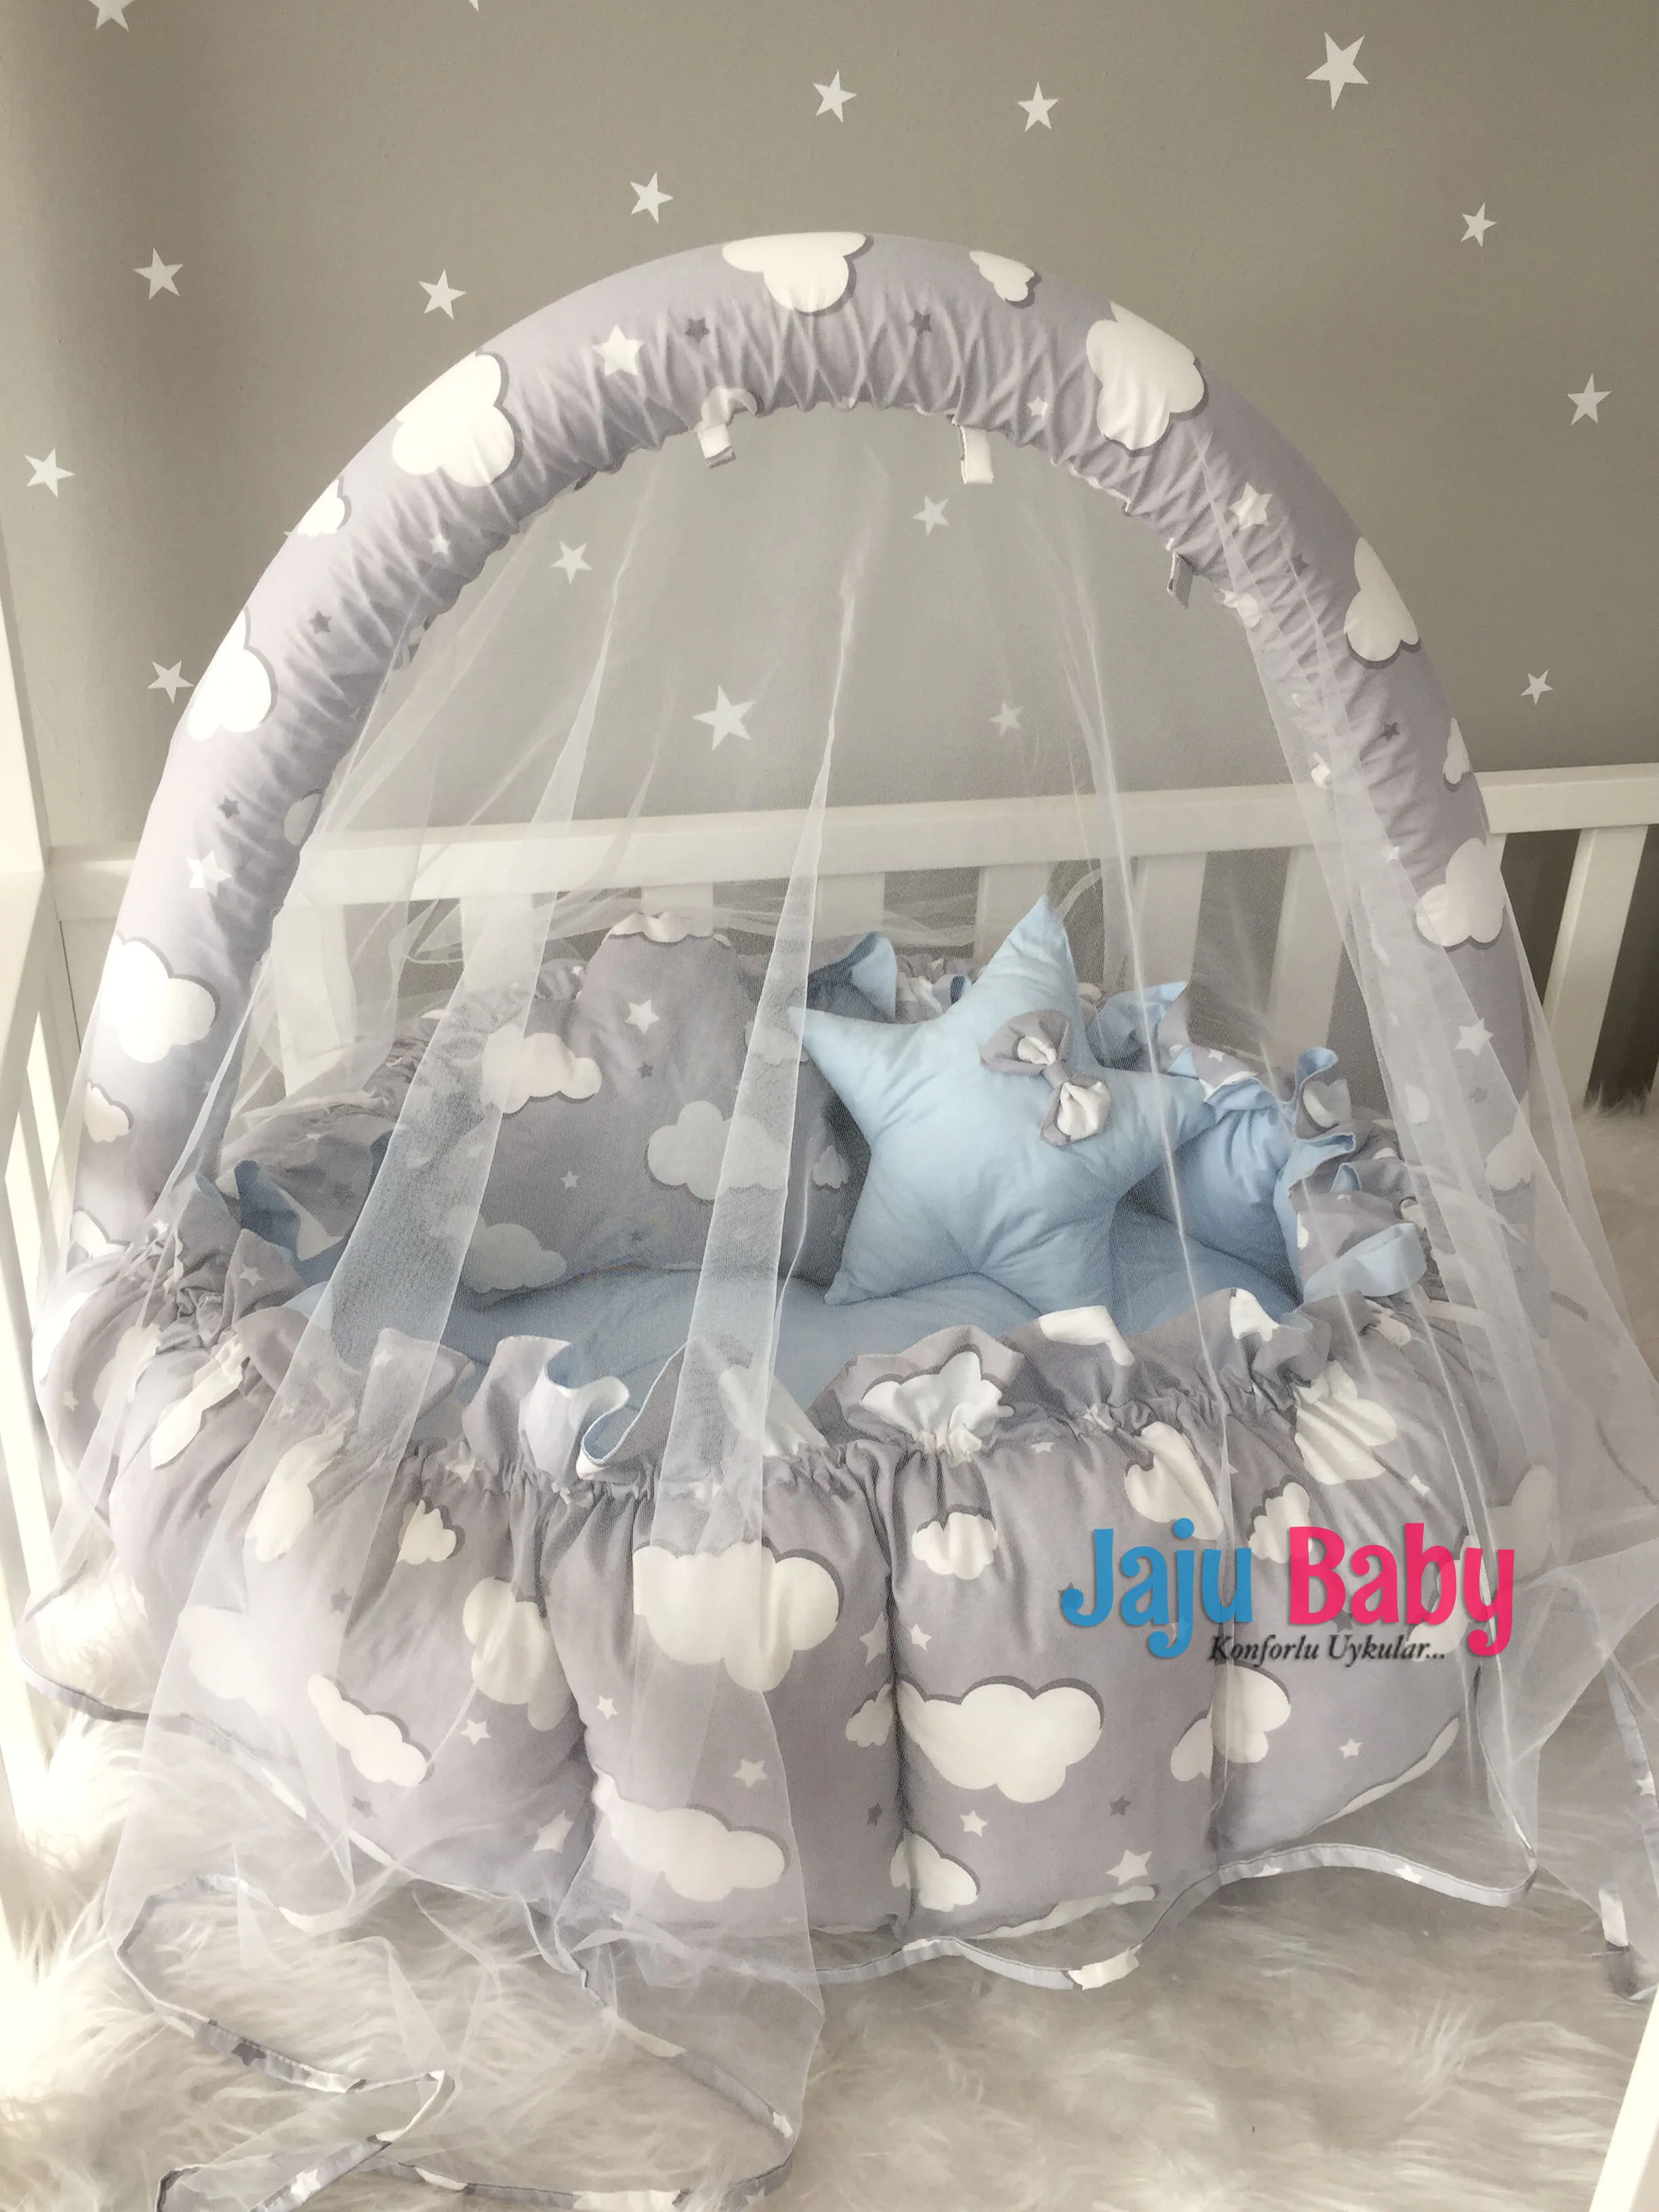 Jaju Baby Gray Cloud - Blue Patterned Design Luxury Play Mat Babynest Mosquito Net Tulle Toy Apparatus Set, Play Mat, Babynest